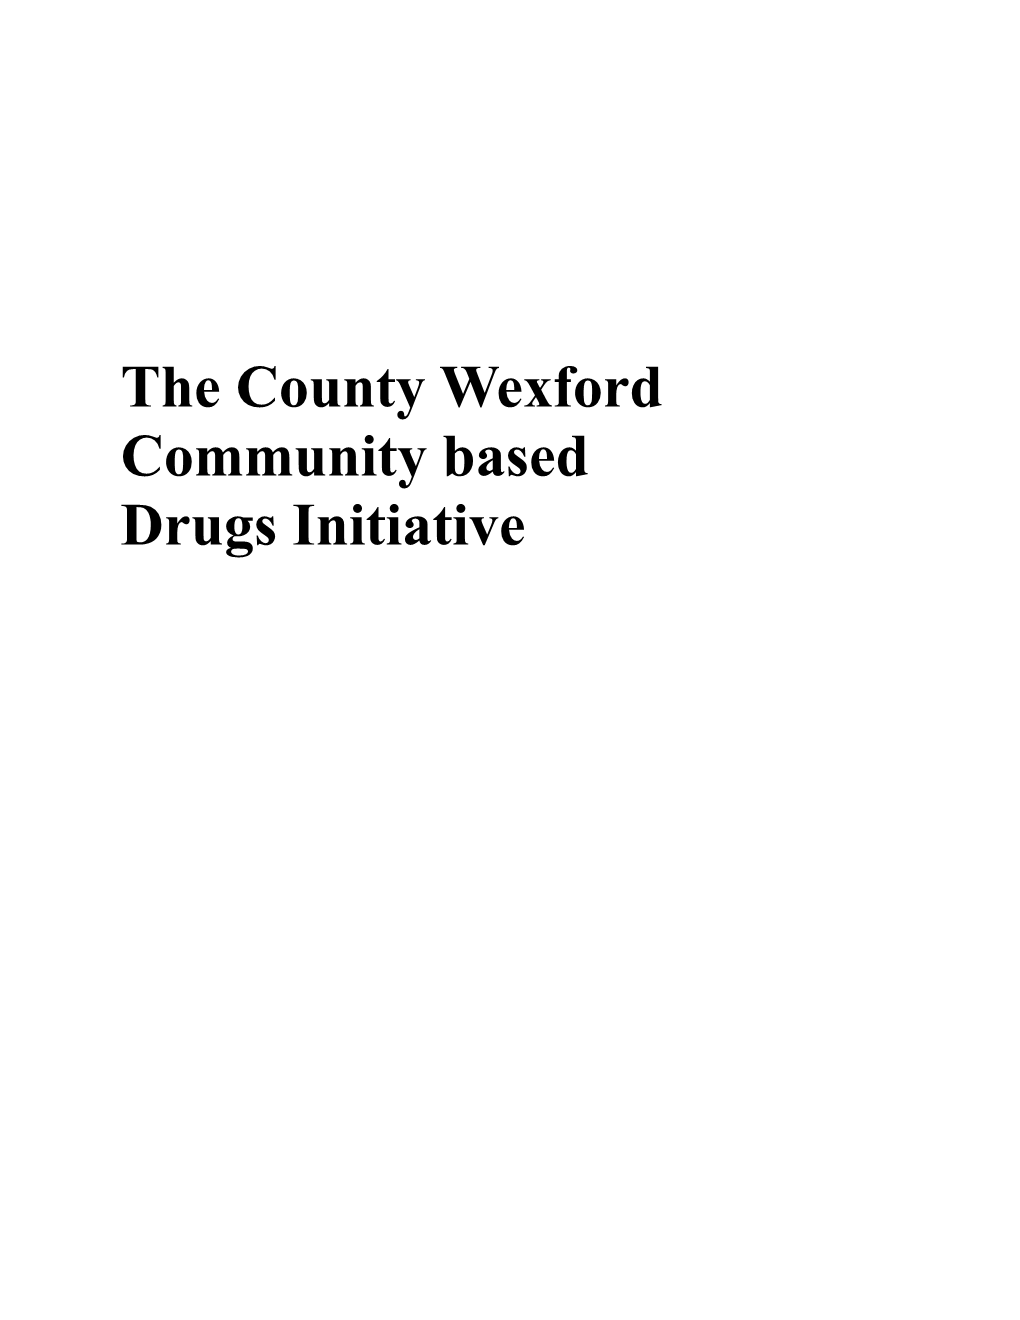 The County Wexford Community Based Drugs Initiative: Proposal For